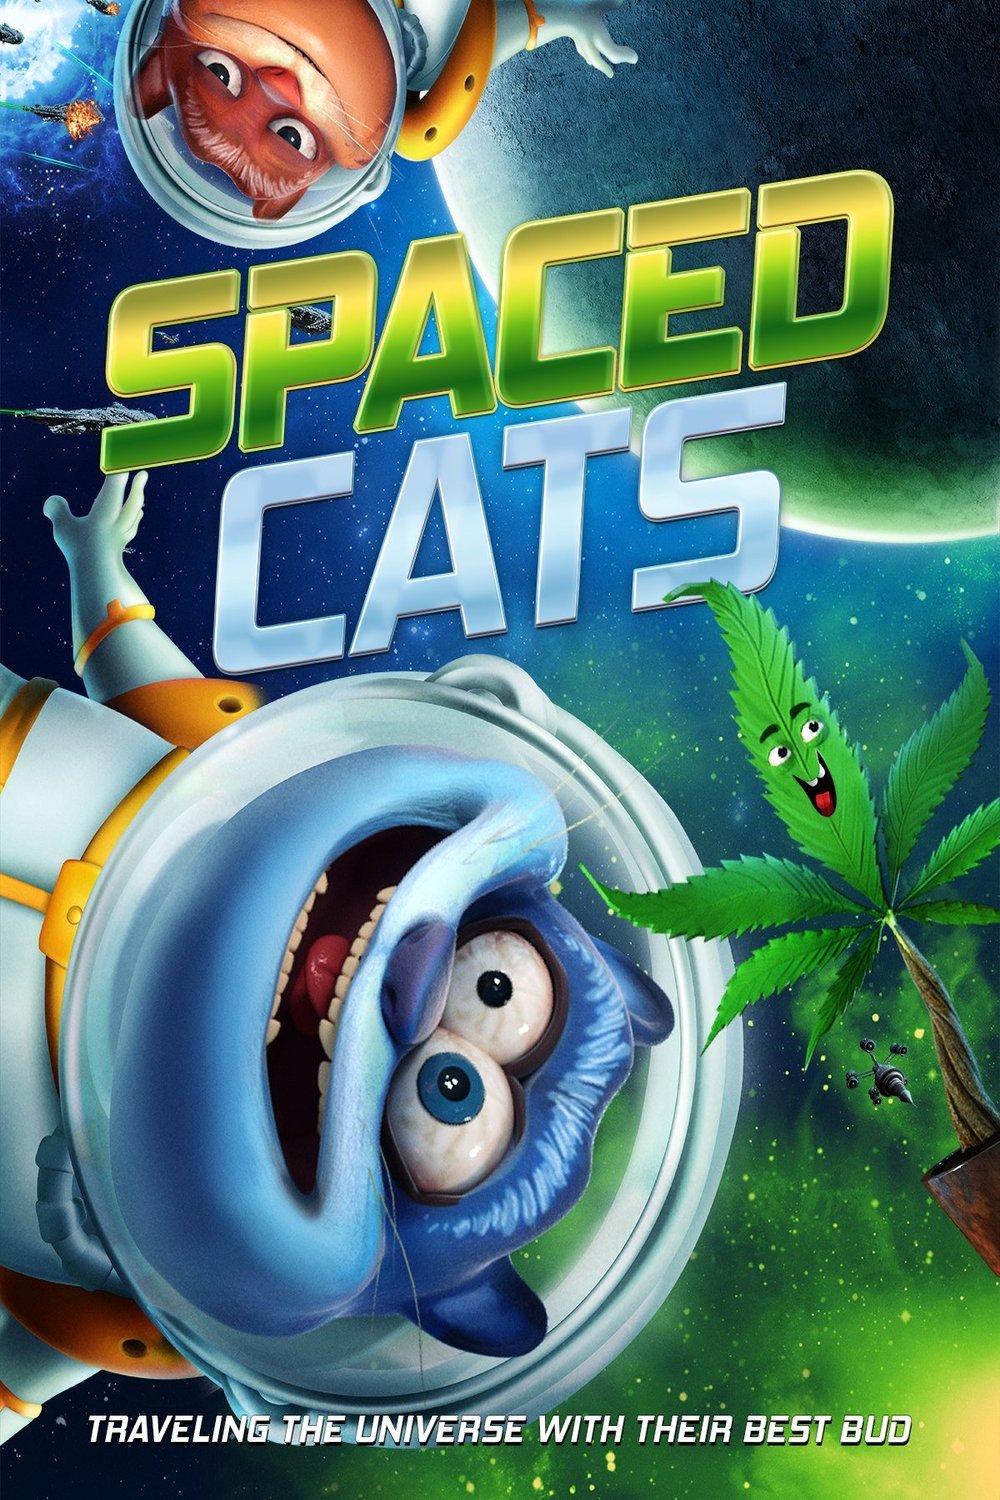 Poster of the movie Spaced Cats